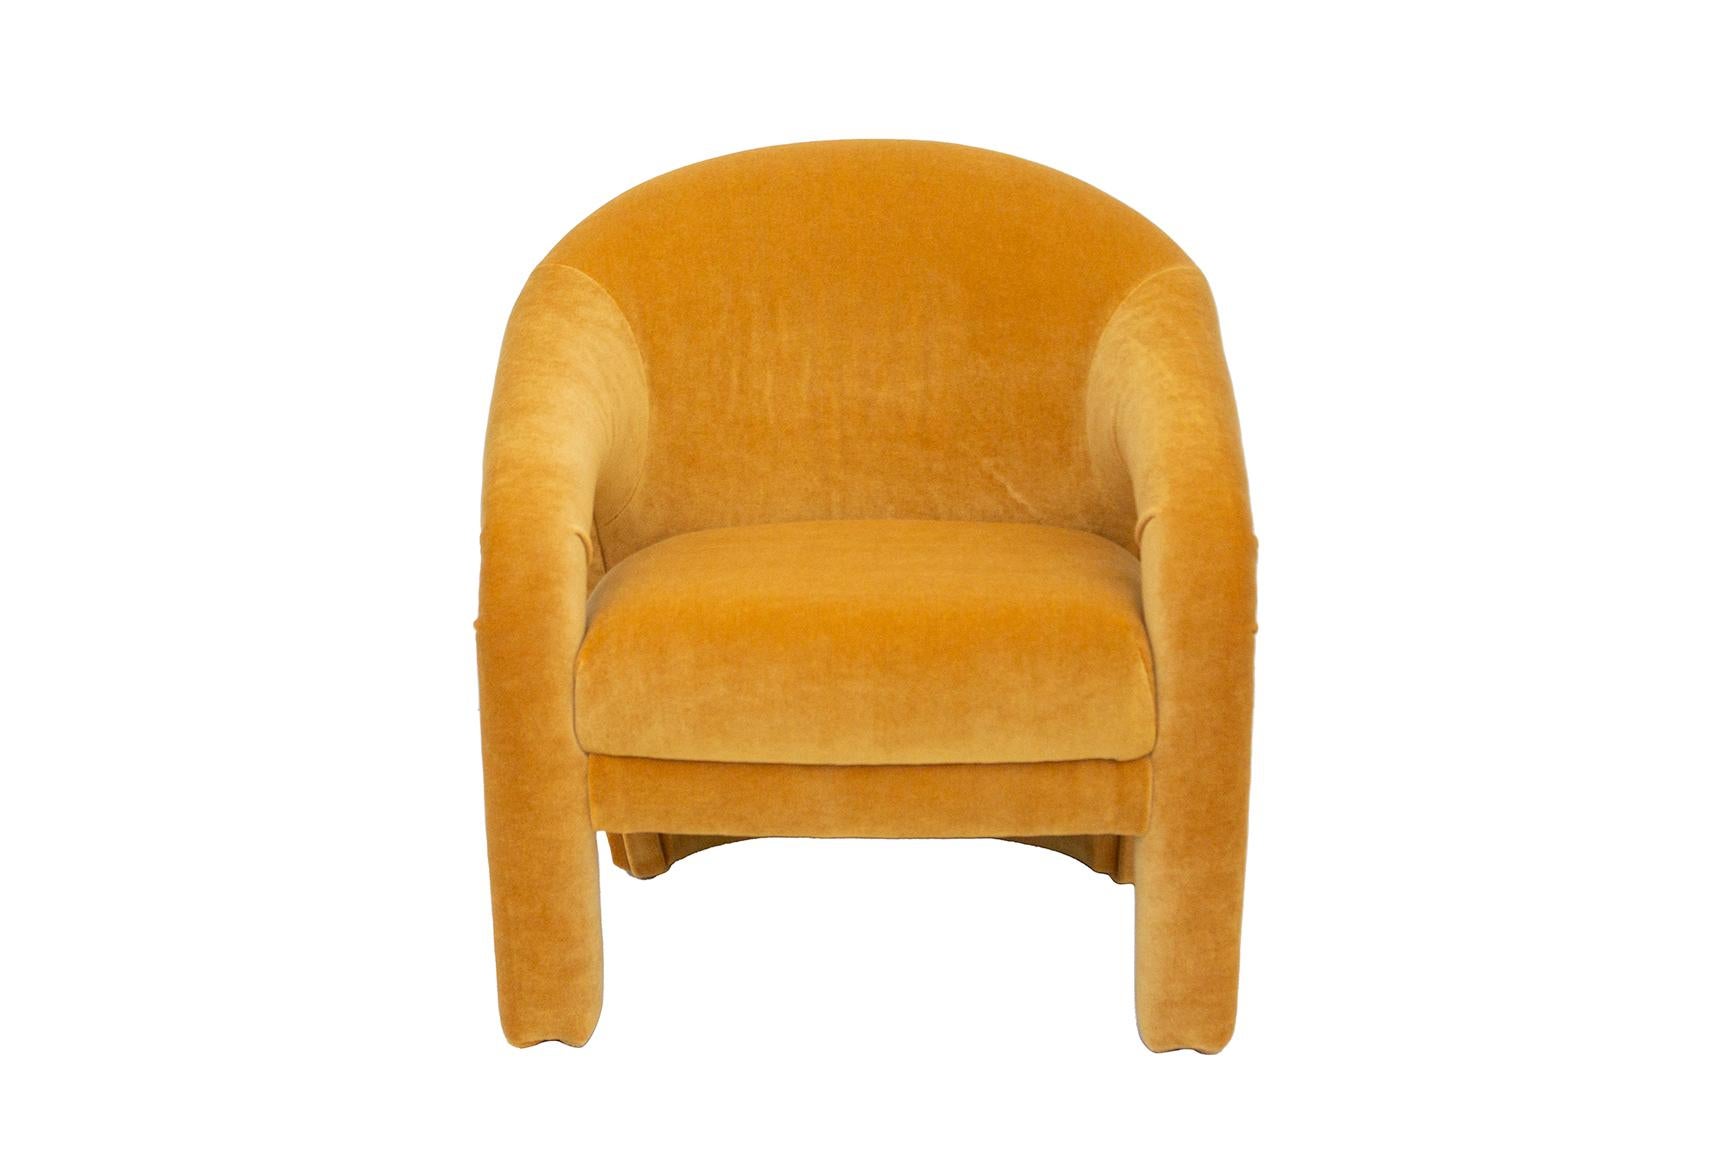 USA, 1980s
Upholstered postmodern armchair by Weiman. Ultra padded back rest, comfortable design with open cutout style arms. Newly reupholstered in a goldenrod velvet. Made by Weiman. 
Dimensions: 31